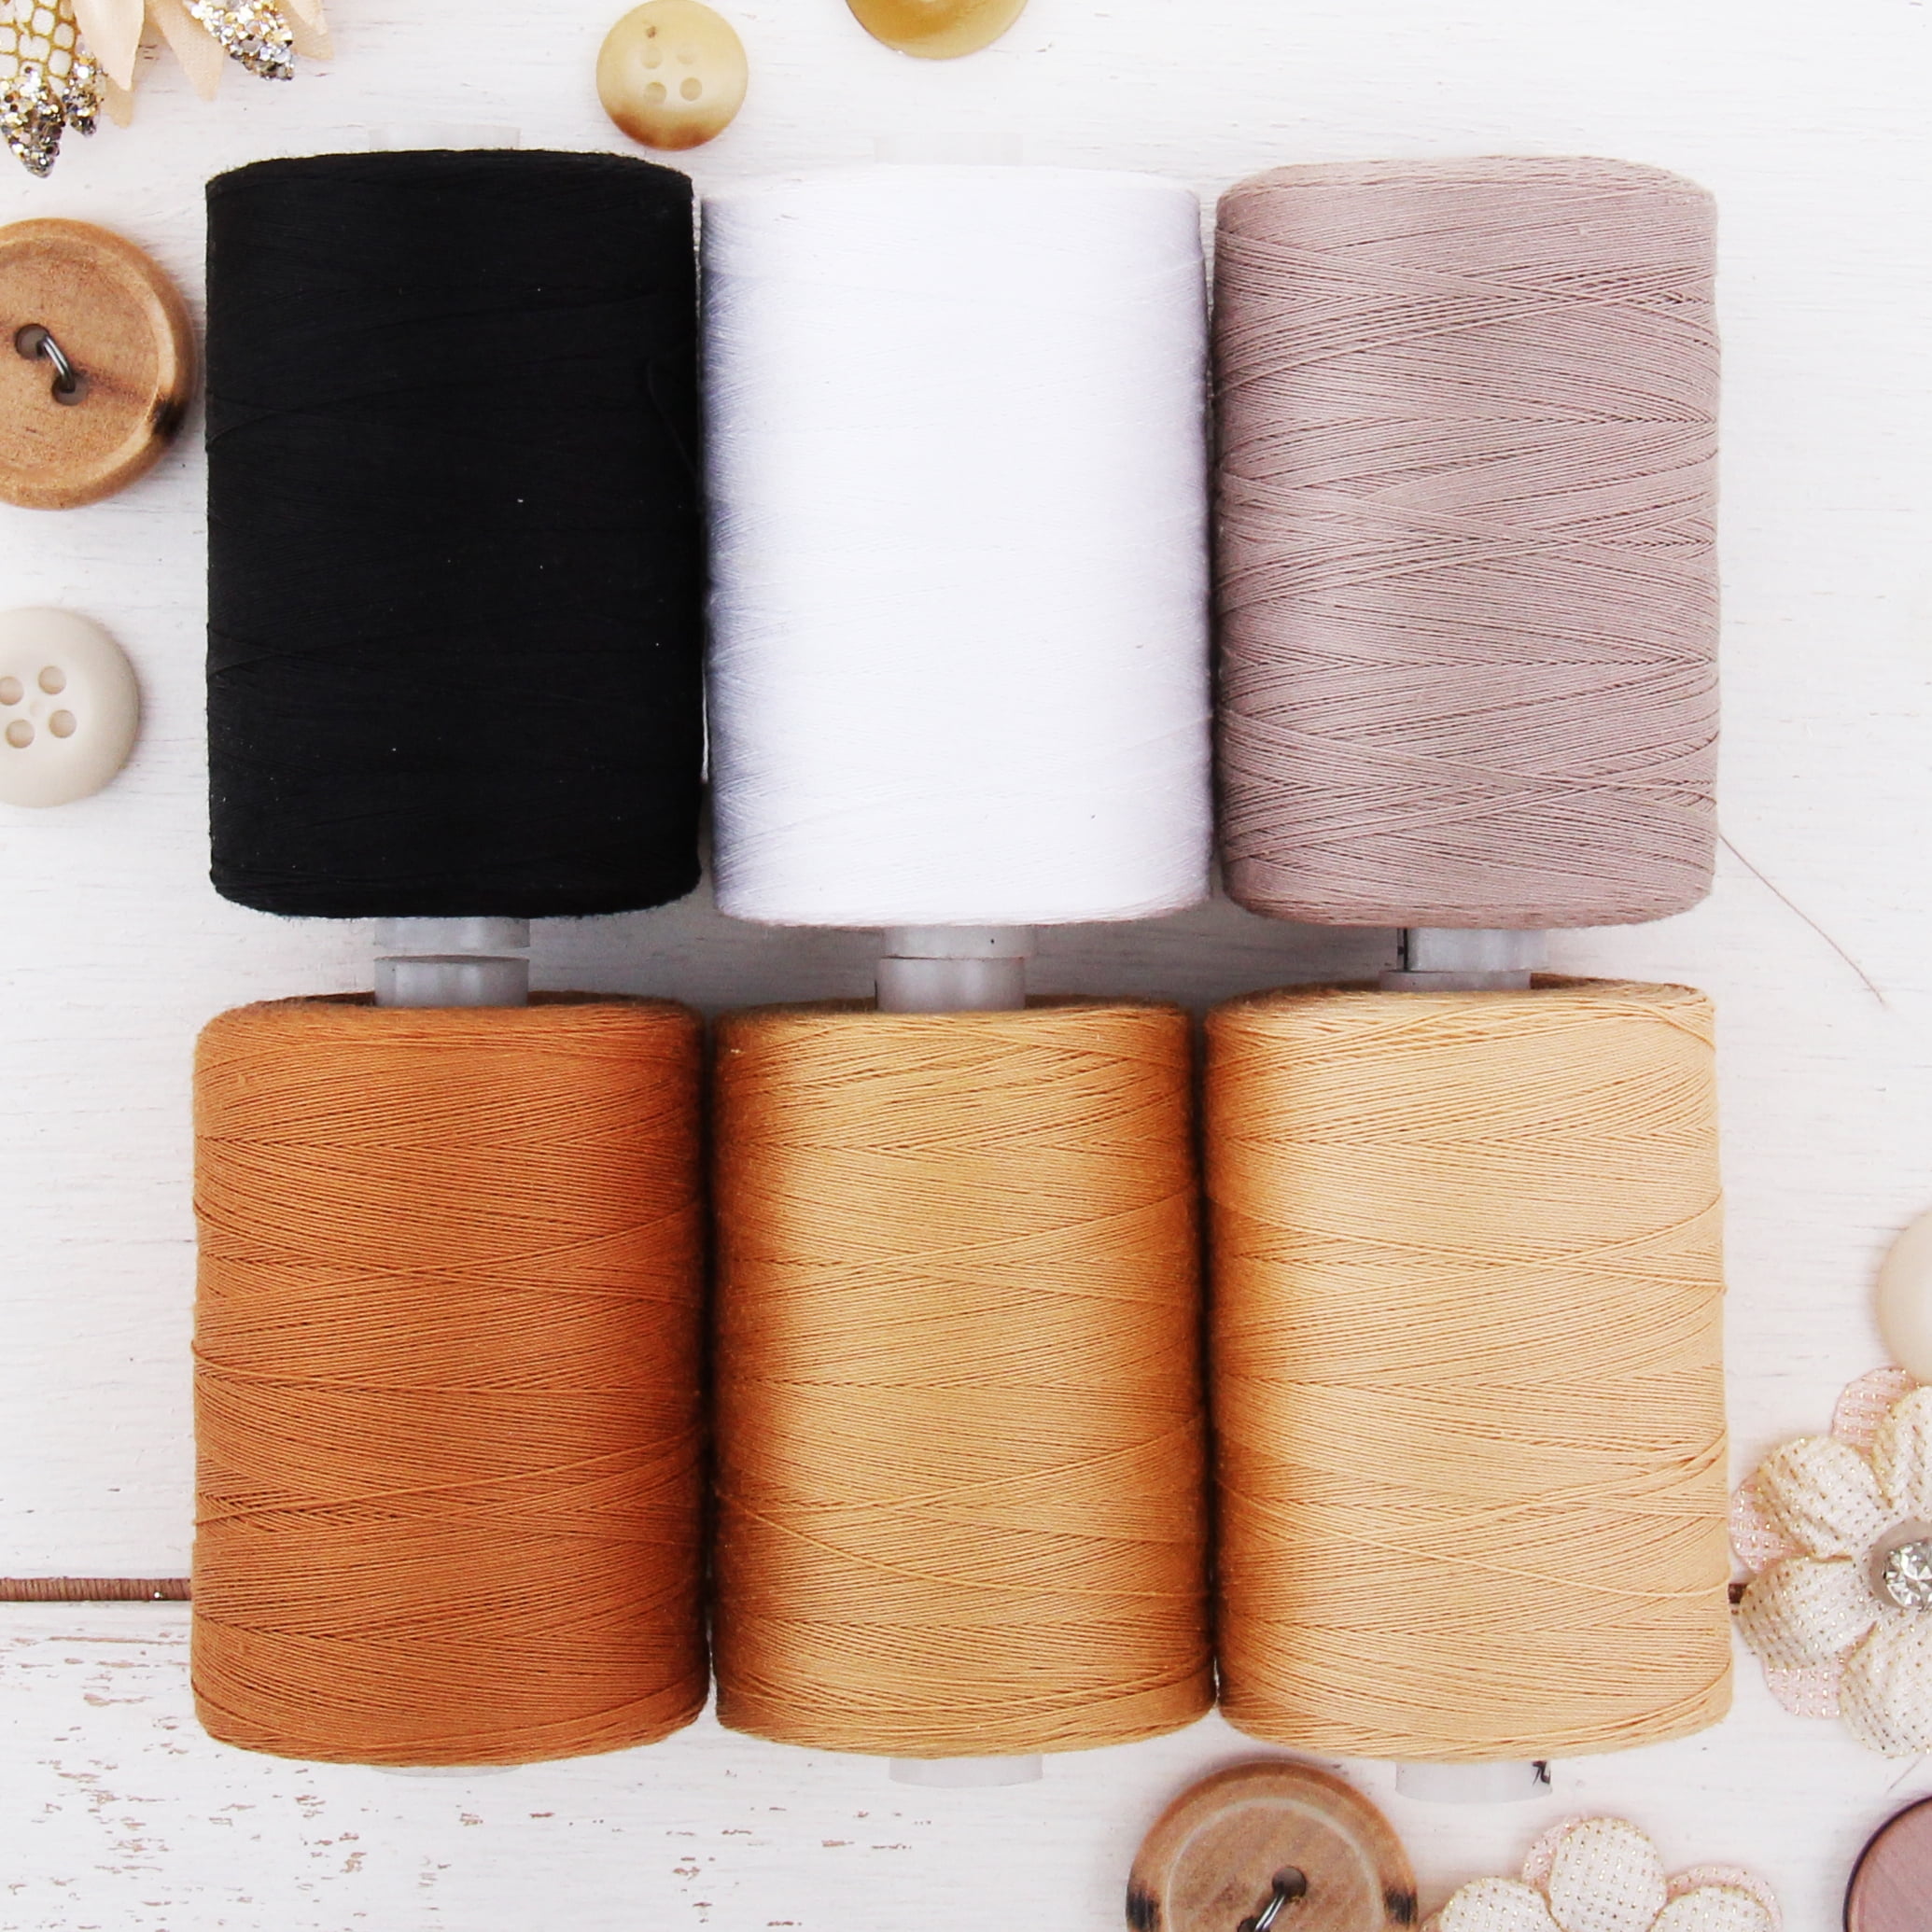 1100 Yards Over 20 Other Sets Available Threadart 100% Cotton Thread Set Long Staple & Low Lint 1000M For Quilting & Sewing 50/3 Weight Spools 10 Black Spools